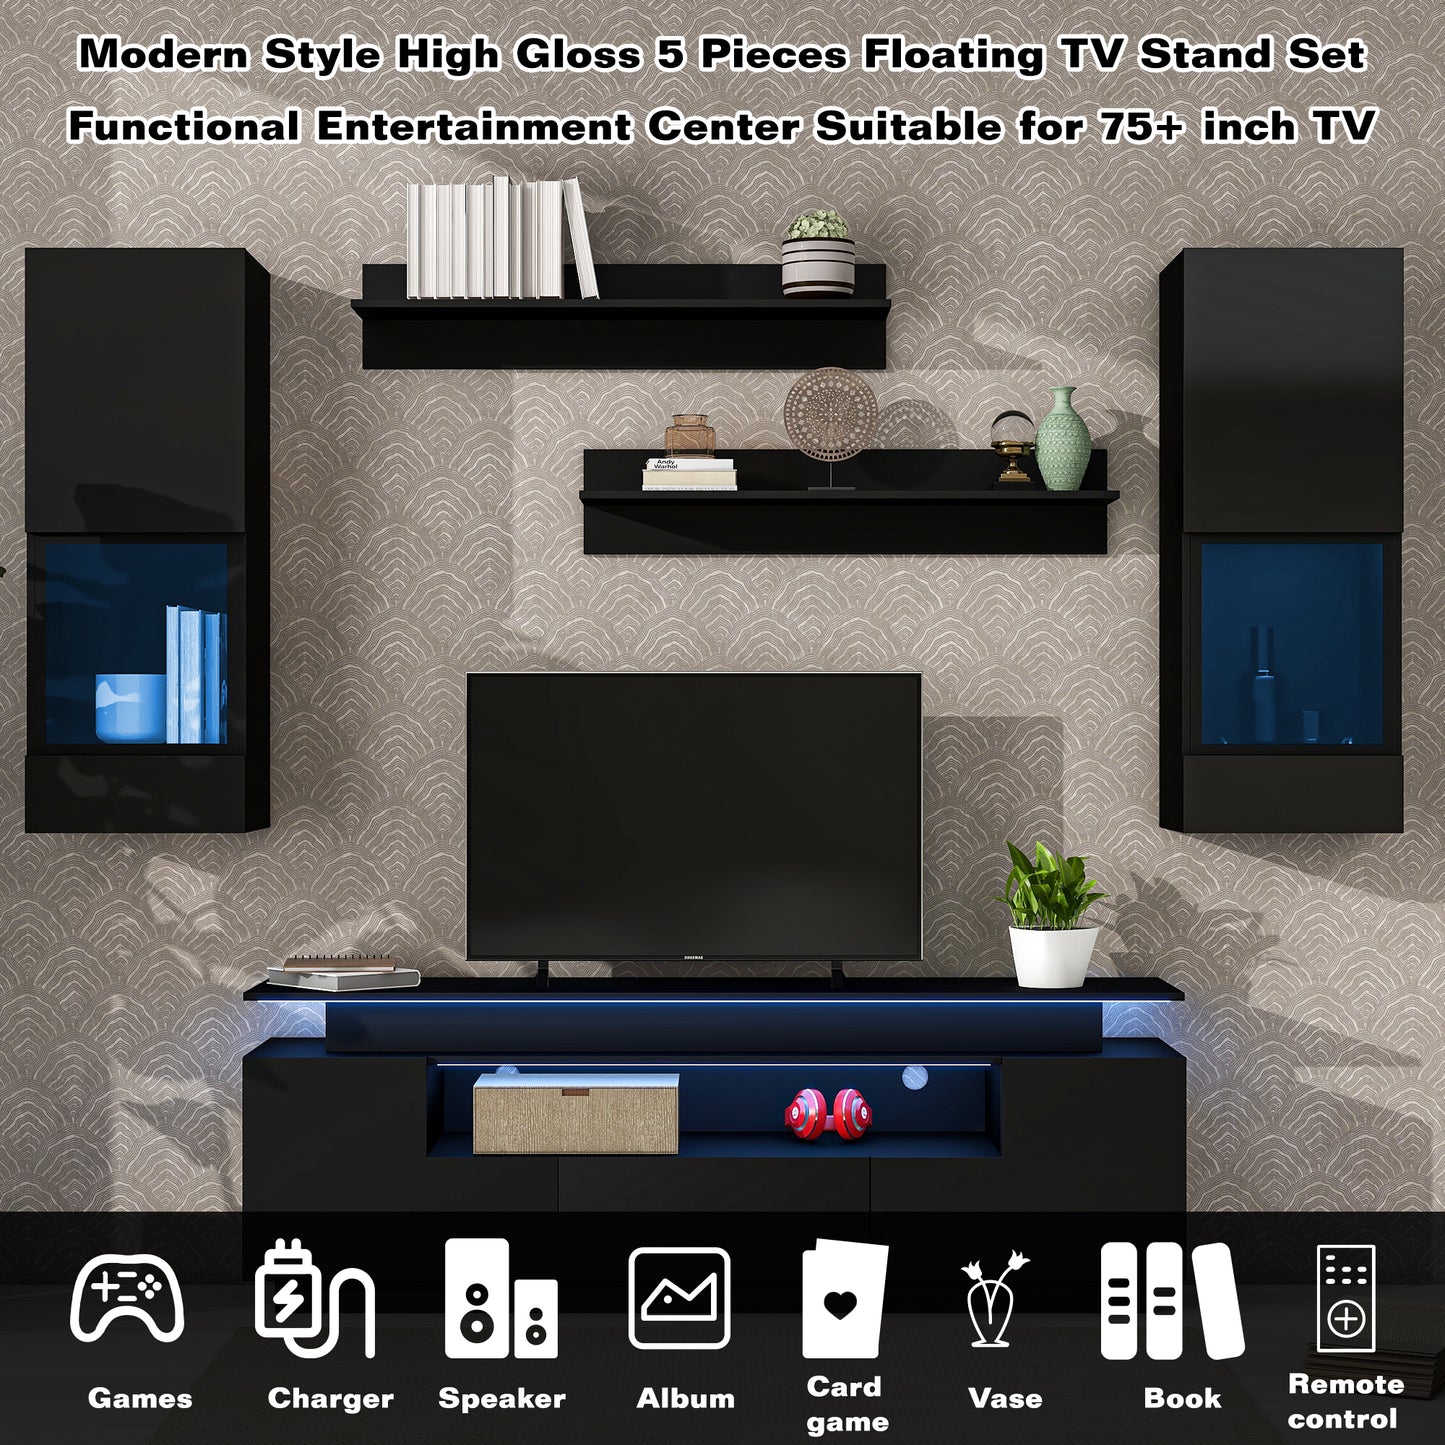 ON-TREND Stylish Functional TV stand, 5 Pieces Floating TV Stand Set, High Gloss Wall Mounted Entertainment Center with 16-color LED Light Strips for 75+ inch TV, Black - Enova Luxe Home Store